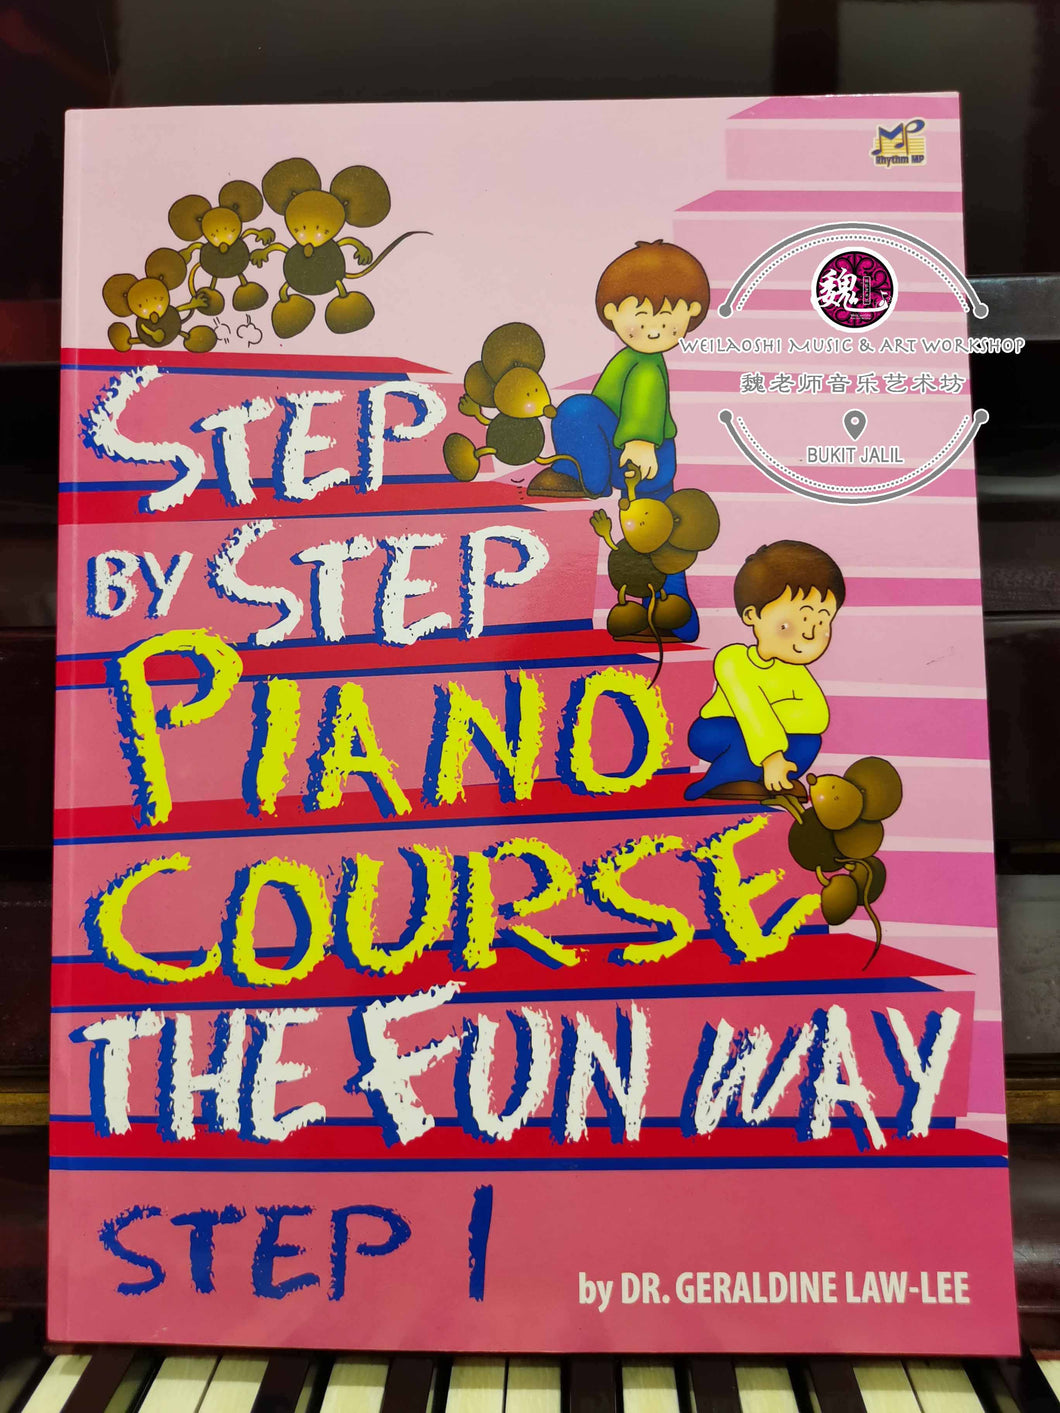 Step by Step Piano Course The Fun Way Step 1 by Dr. Geraldine Law-Lee